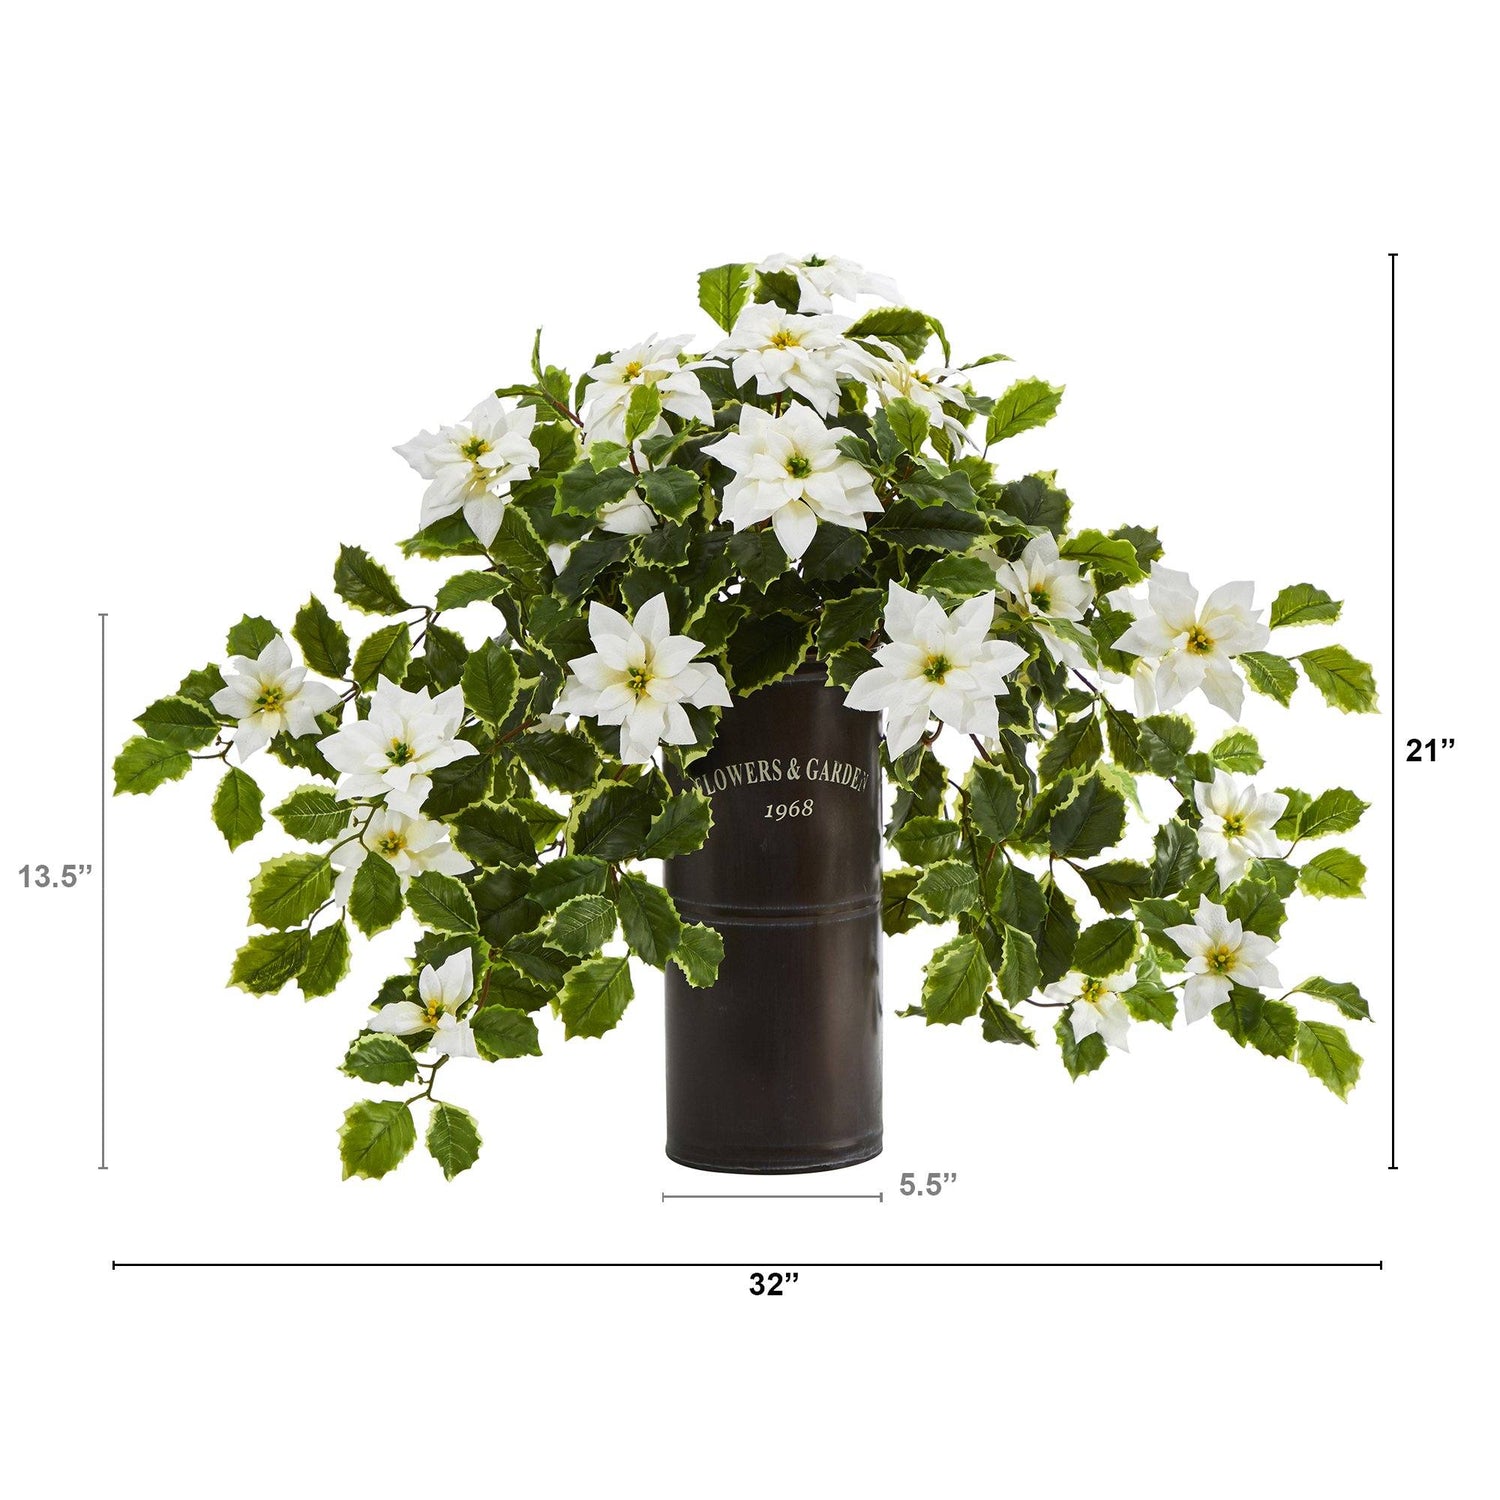 21” Poinsettia and Variegated Holly Artificial Plant in Decorative Planter (Real Touch)